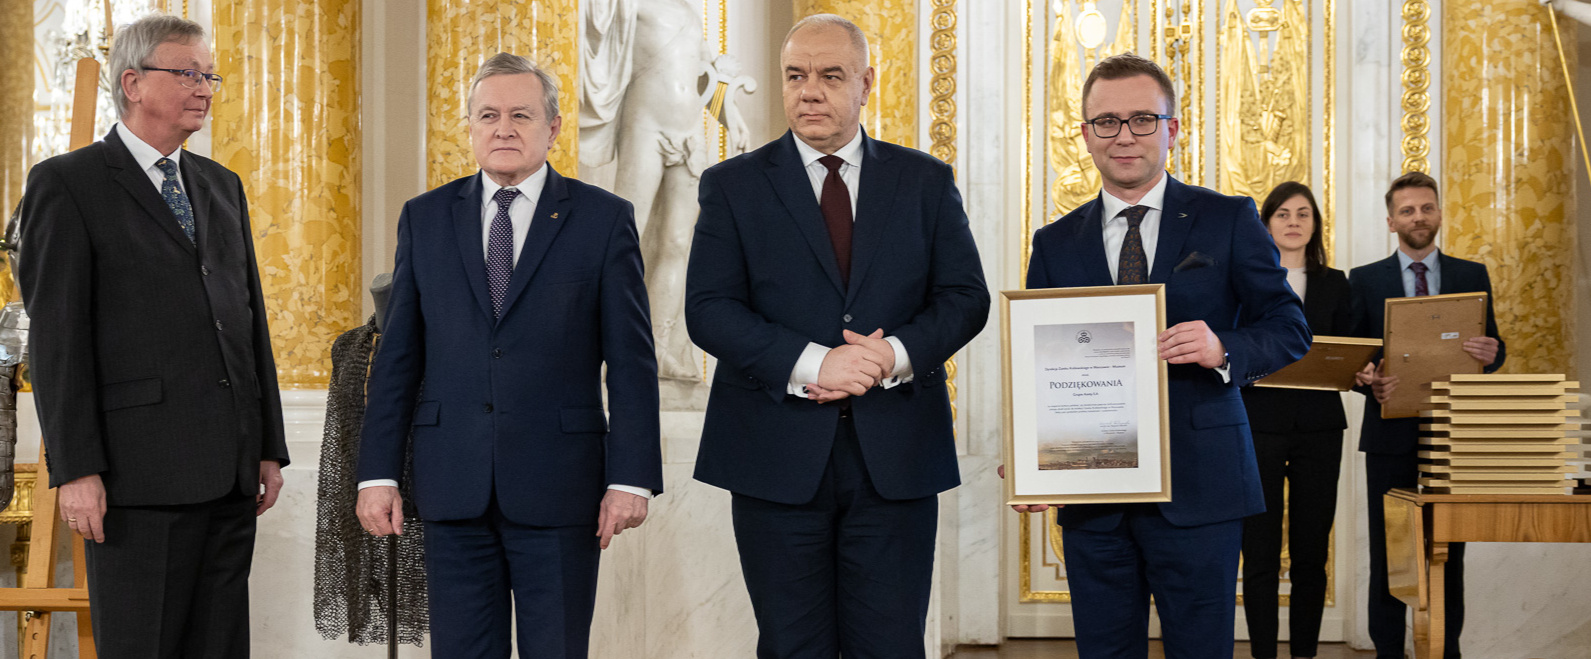 Grupa Azoty supports expansion of Royal Castle in Warsaw’s art collection